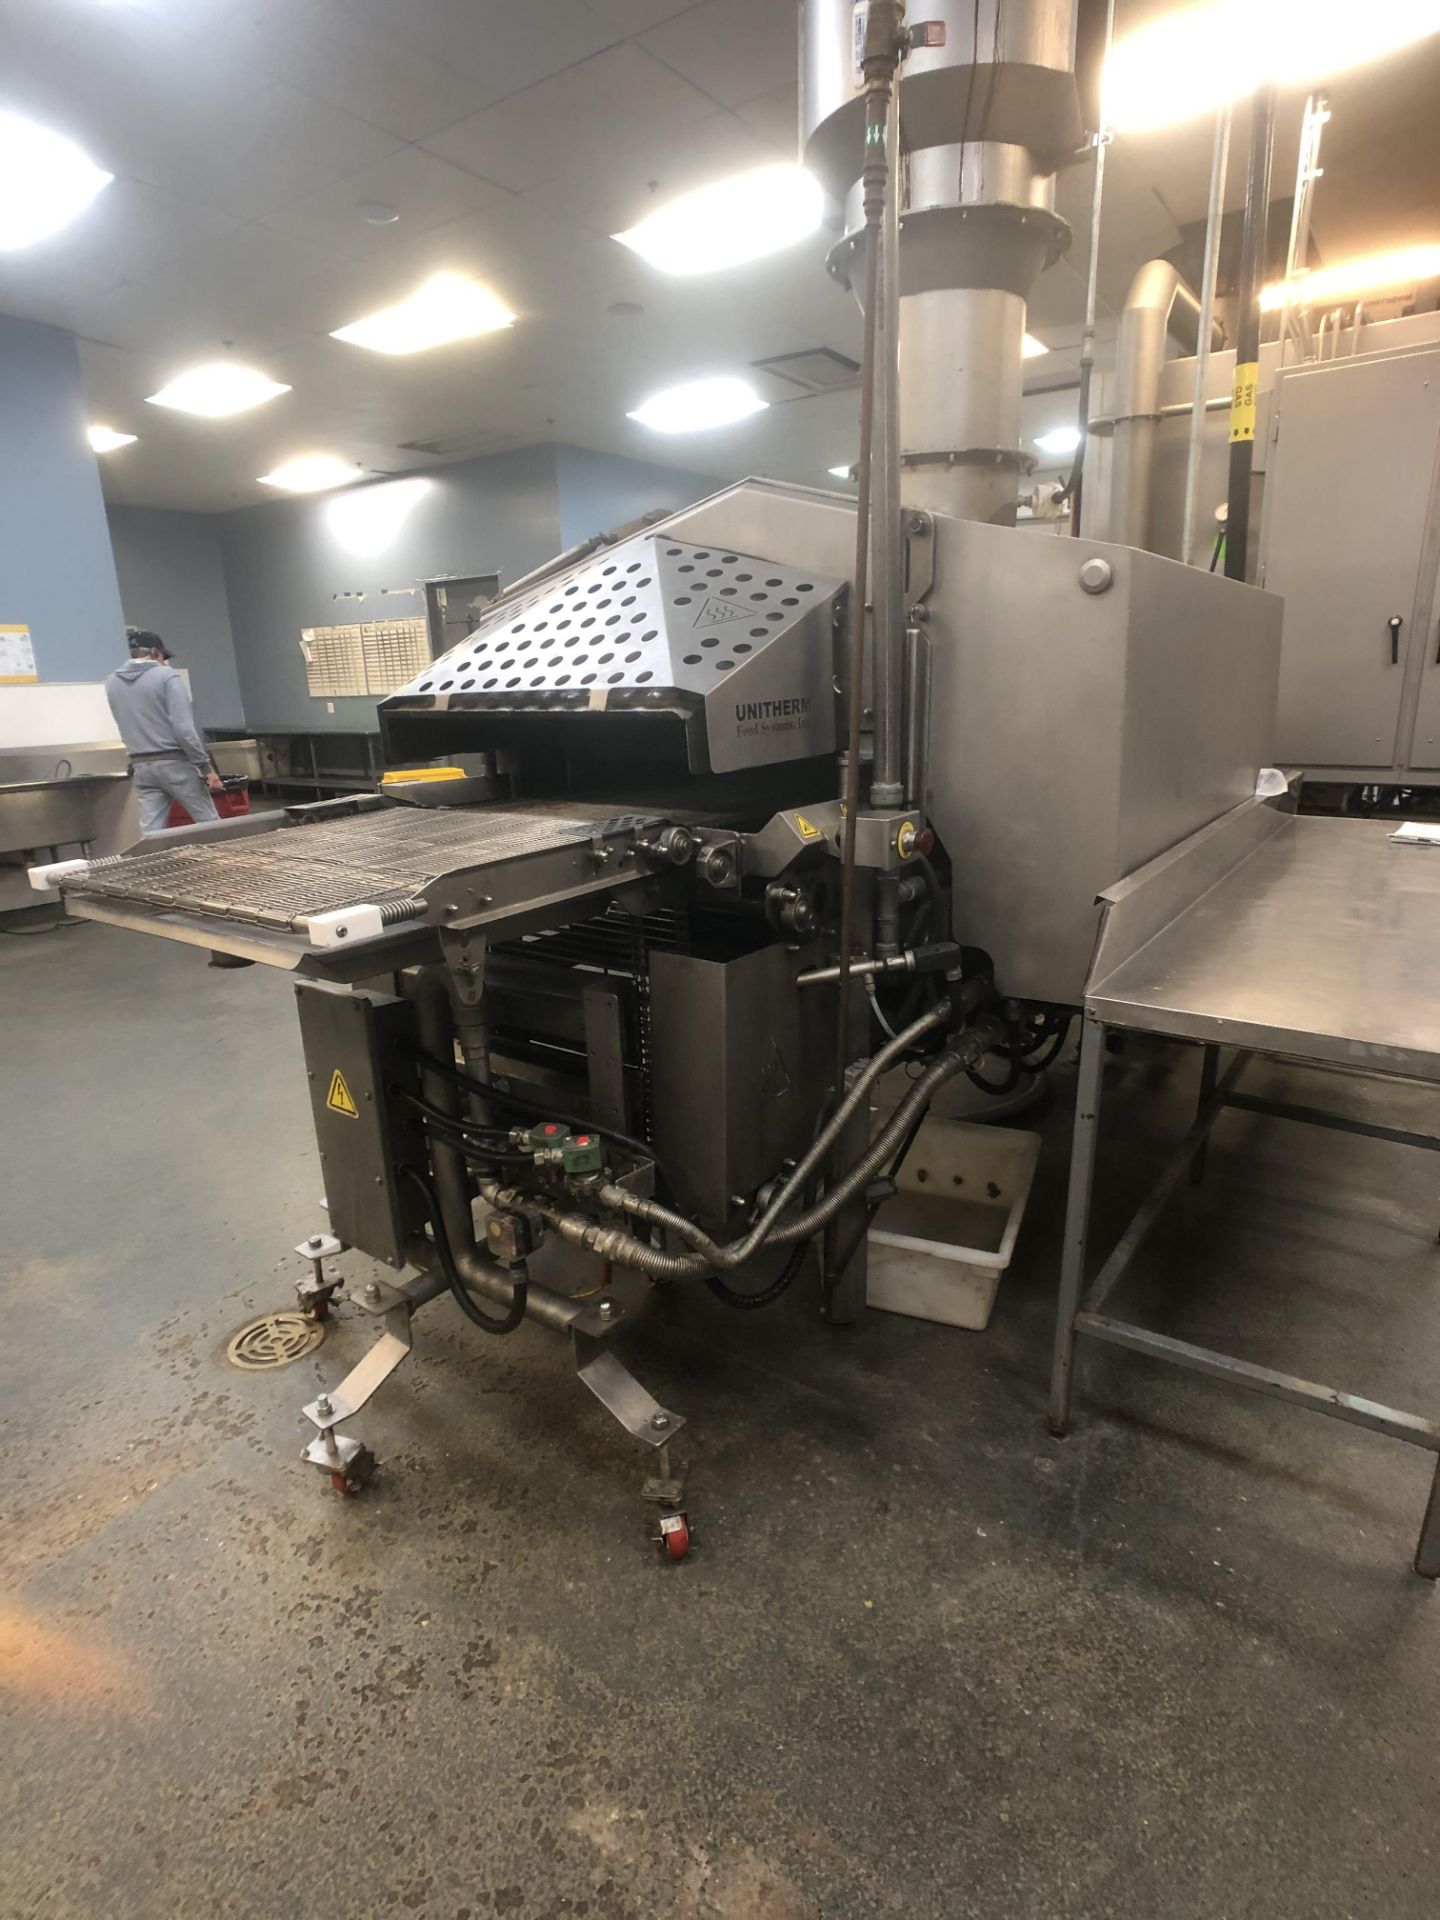 2019 Unitherm Food Systems 24" Flame Grill with Preheat, Model FG-24-8B-P, S/N FLGR-2485, Includes - Image 11 of 19